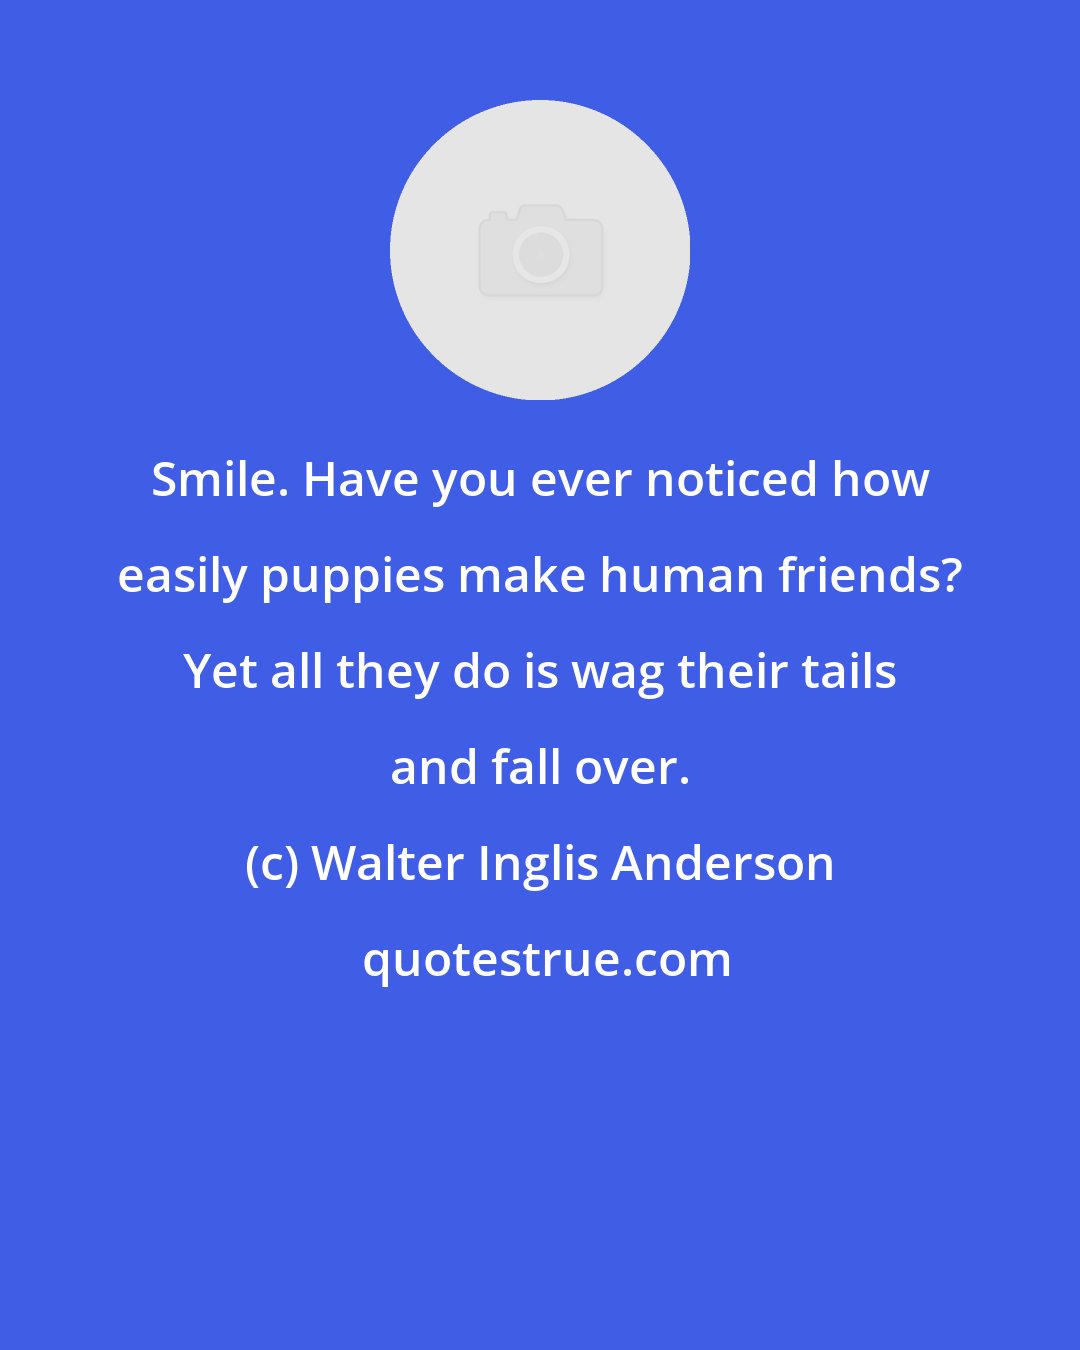 Walter Inglis Anderson: Smile. Have you ever noticed how easily puppies make human friends? Yet all they do is wag their tails and fall over.